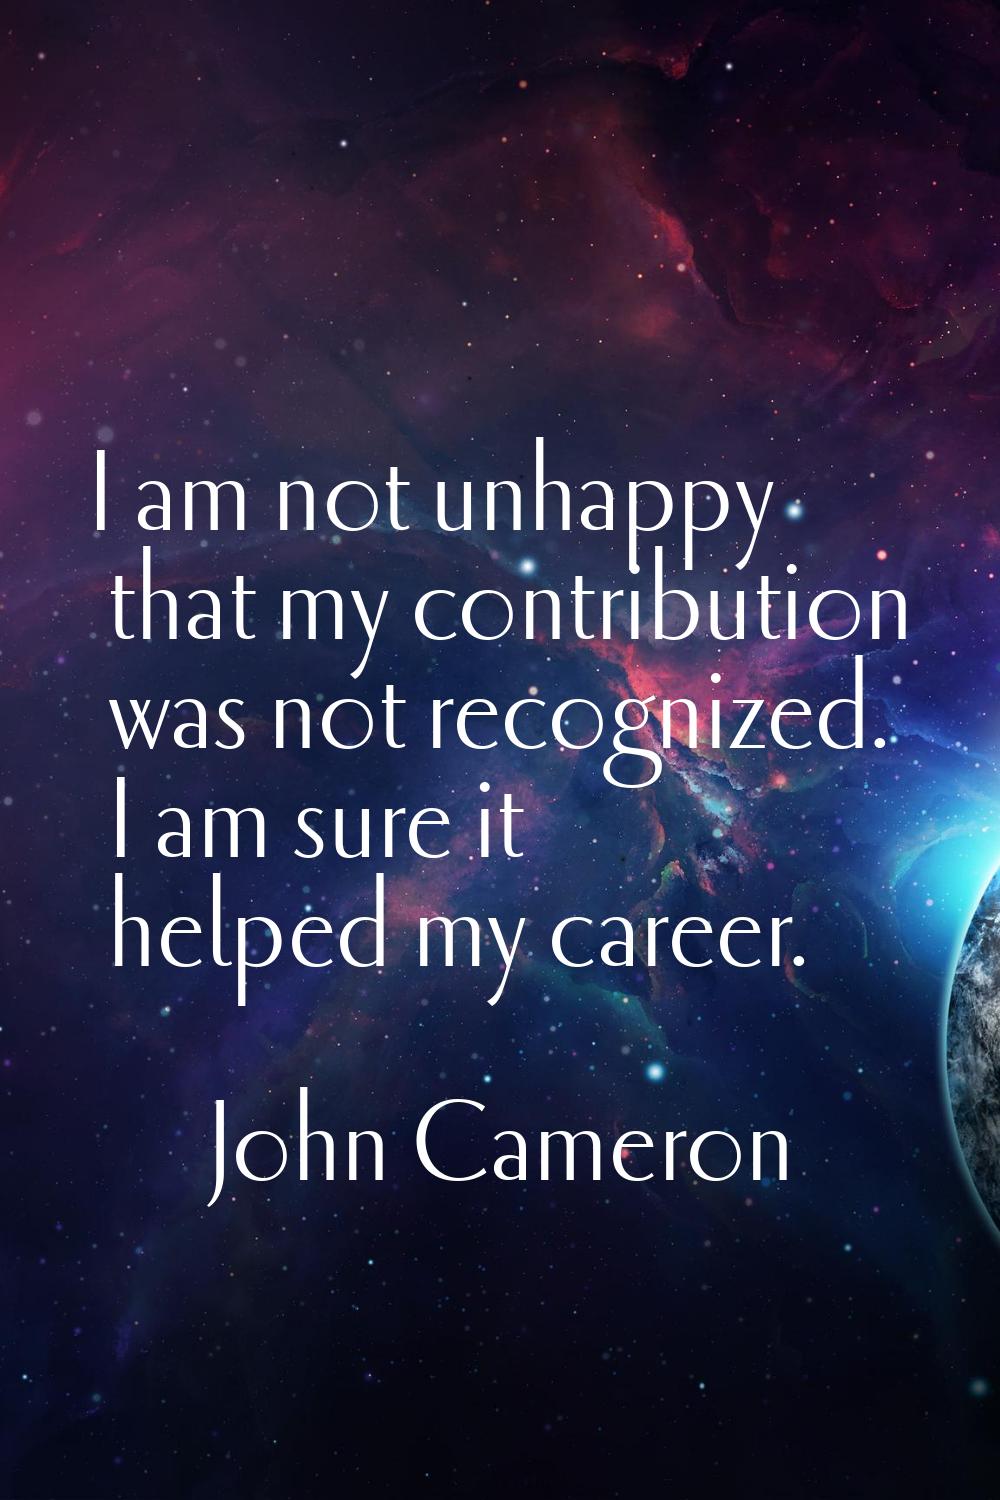 I am not unhappy that my contribution was not recognized. I am sure it helped my career.